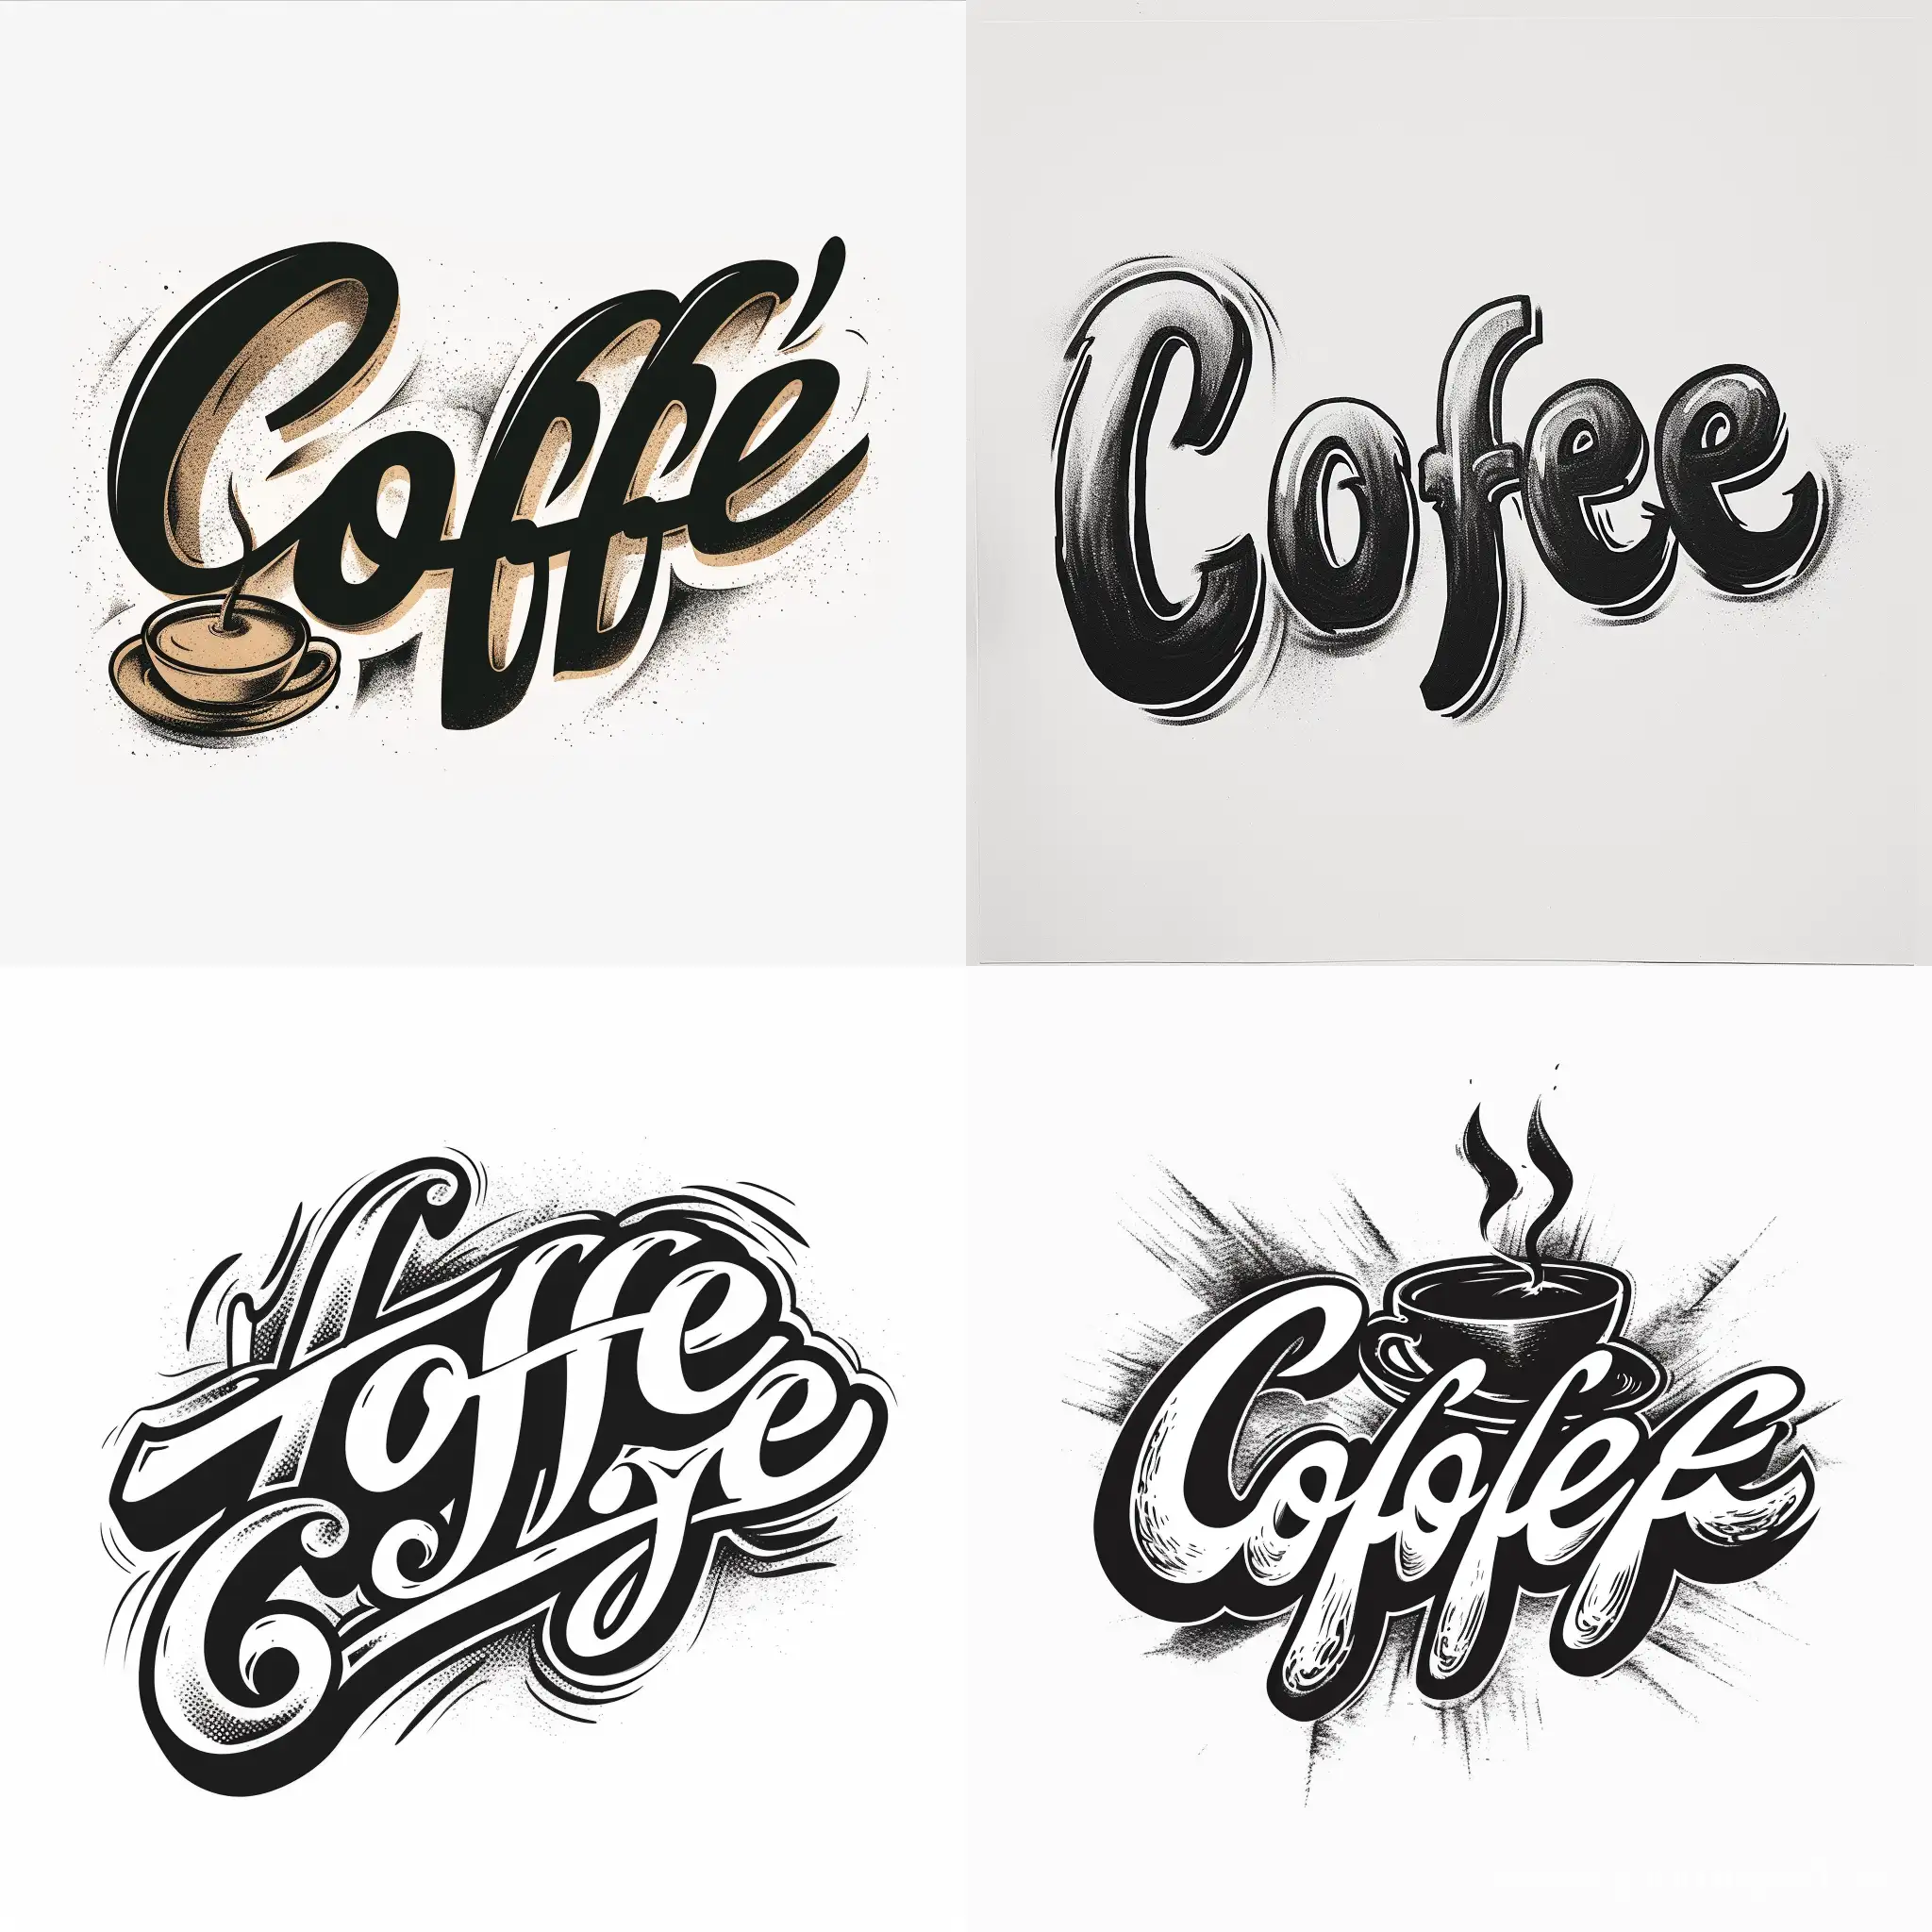 lettering style tattoo, cool calligraphy font, bold font, the word espresso, shades around the word, white background, no skin